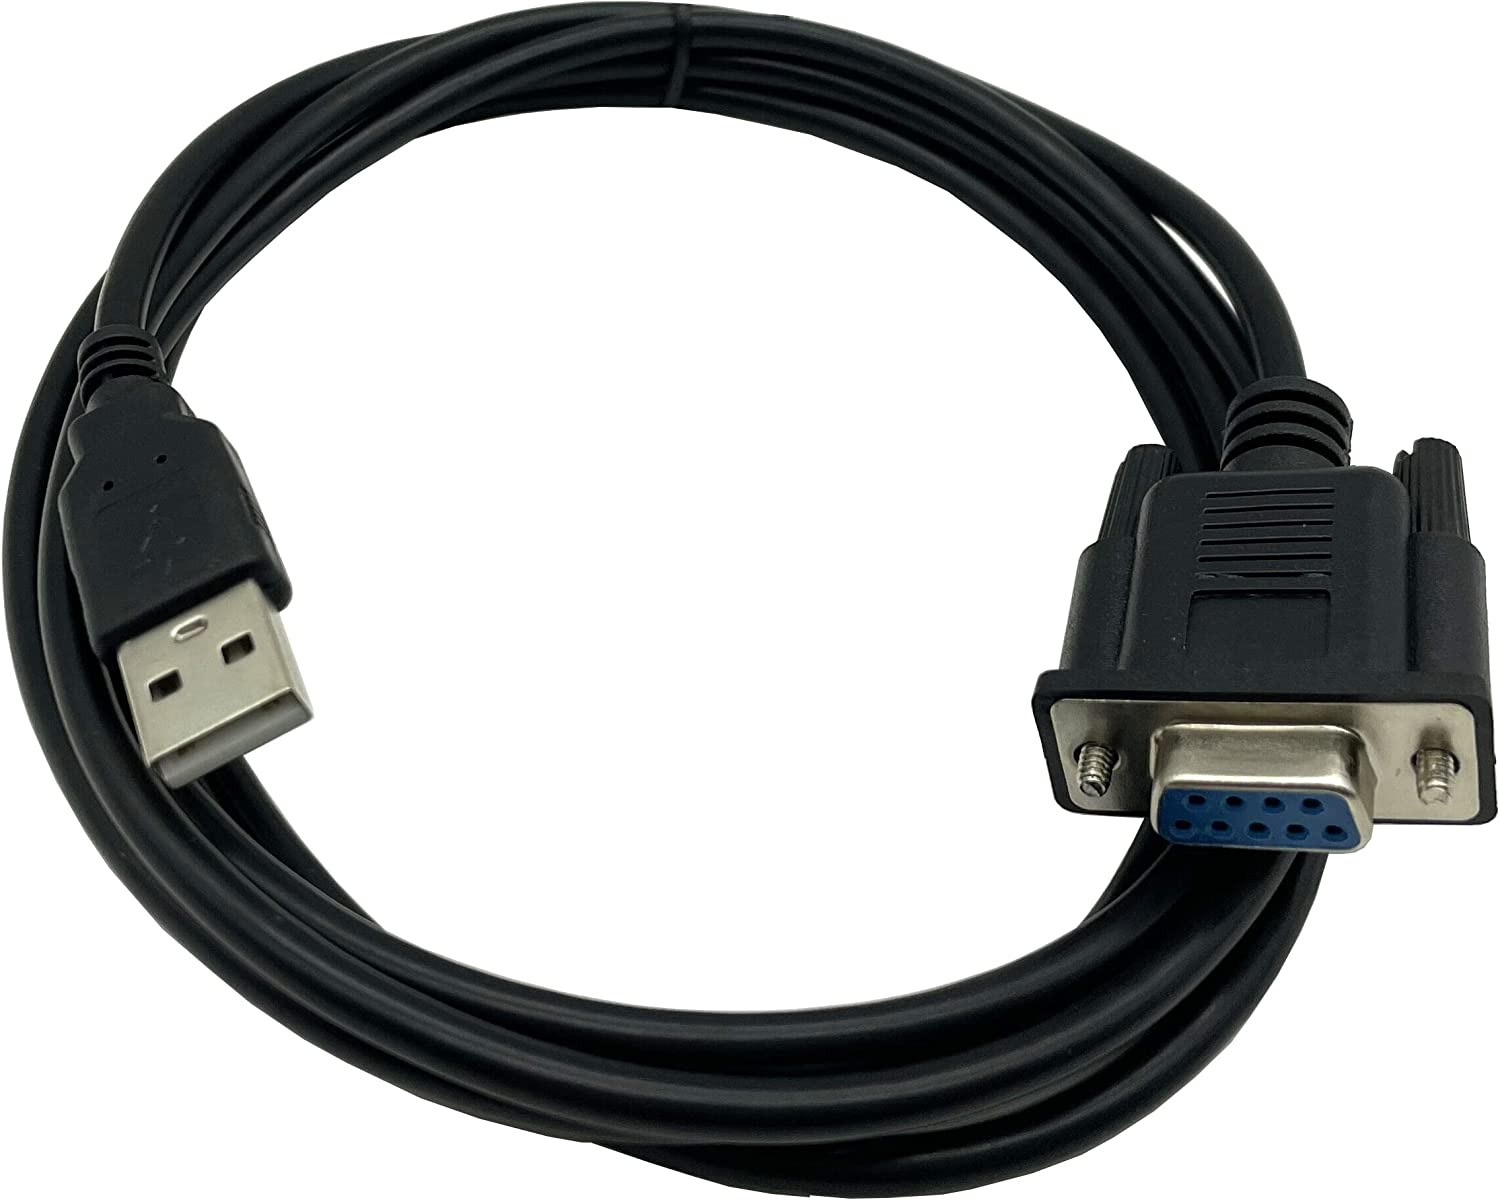 USB to RS232 Serial Adapter, USB a Male to DB9 Pin Female Serial Converter Cable